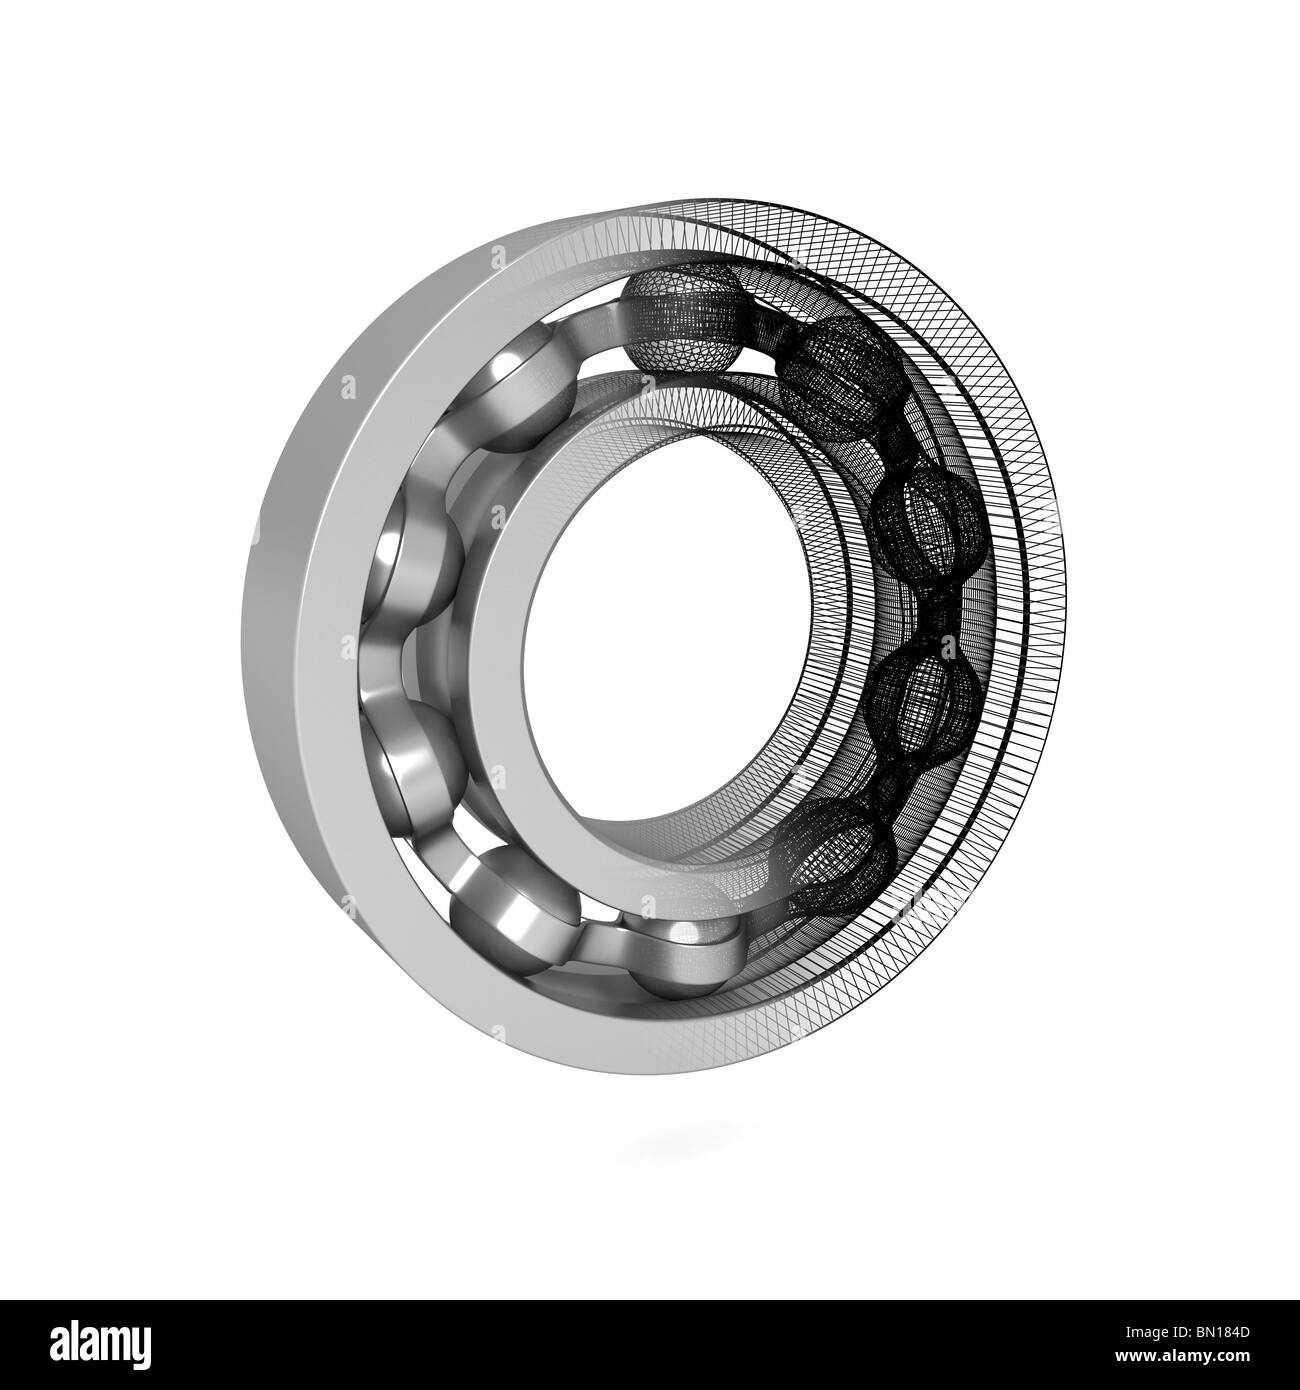 The three-dimensional model - half of bearing is represented as a grid. Stock Photo